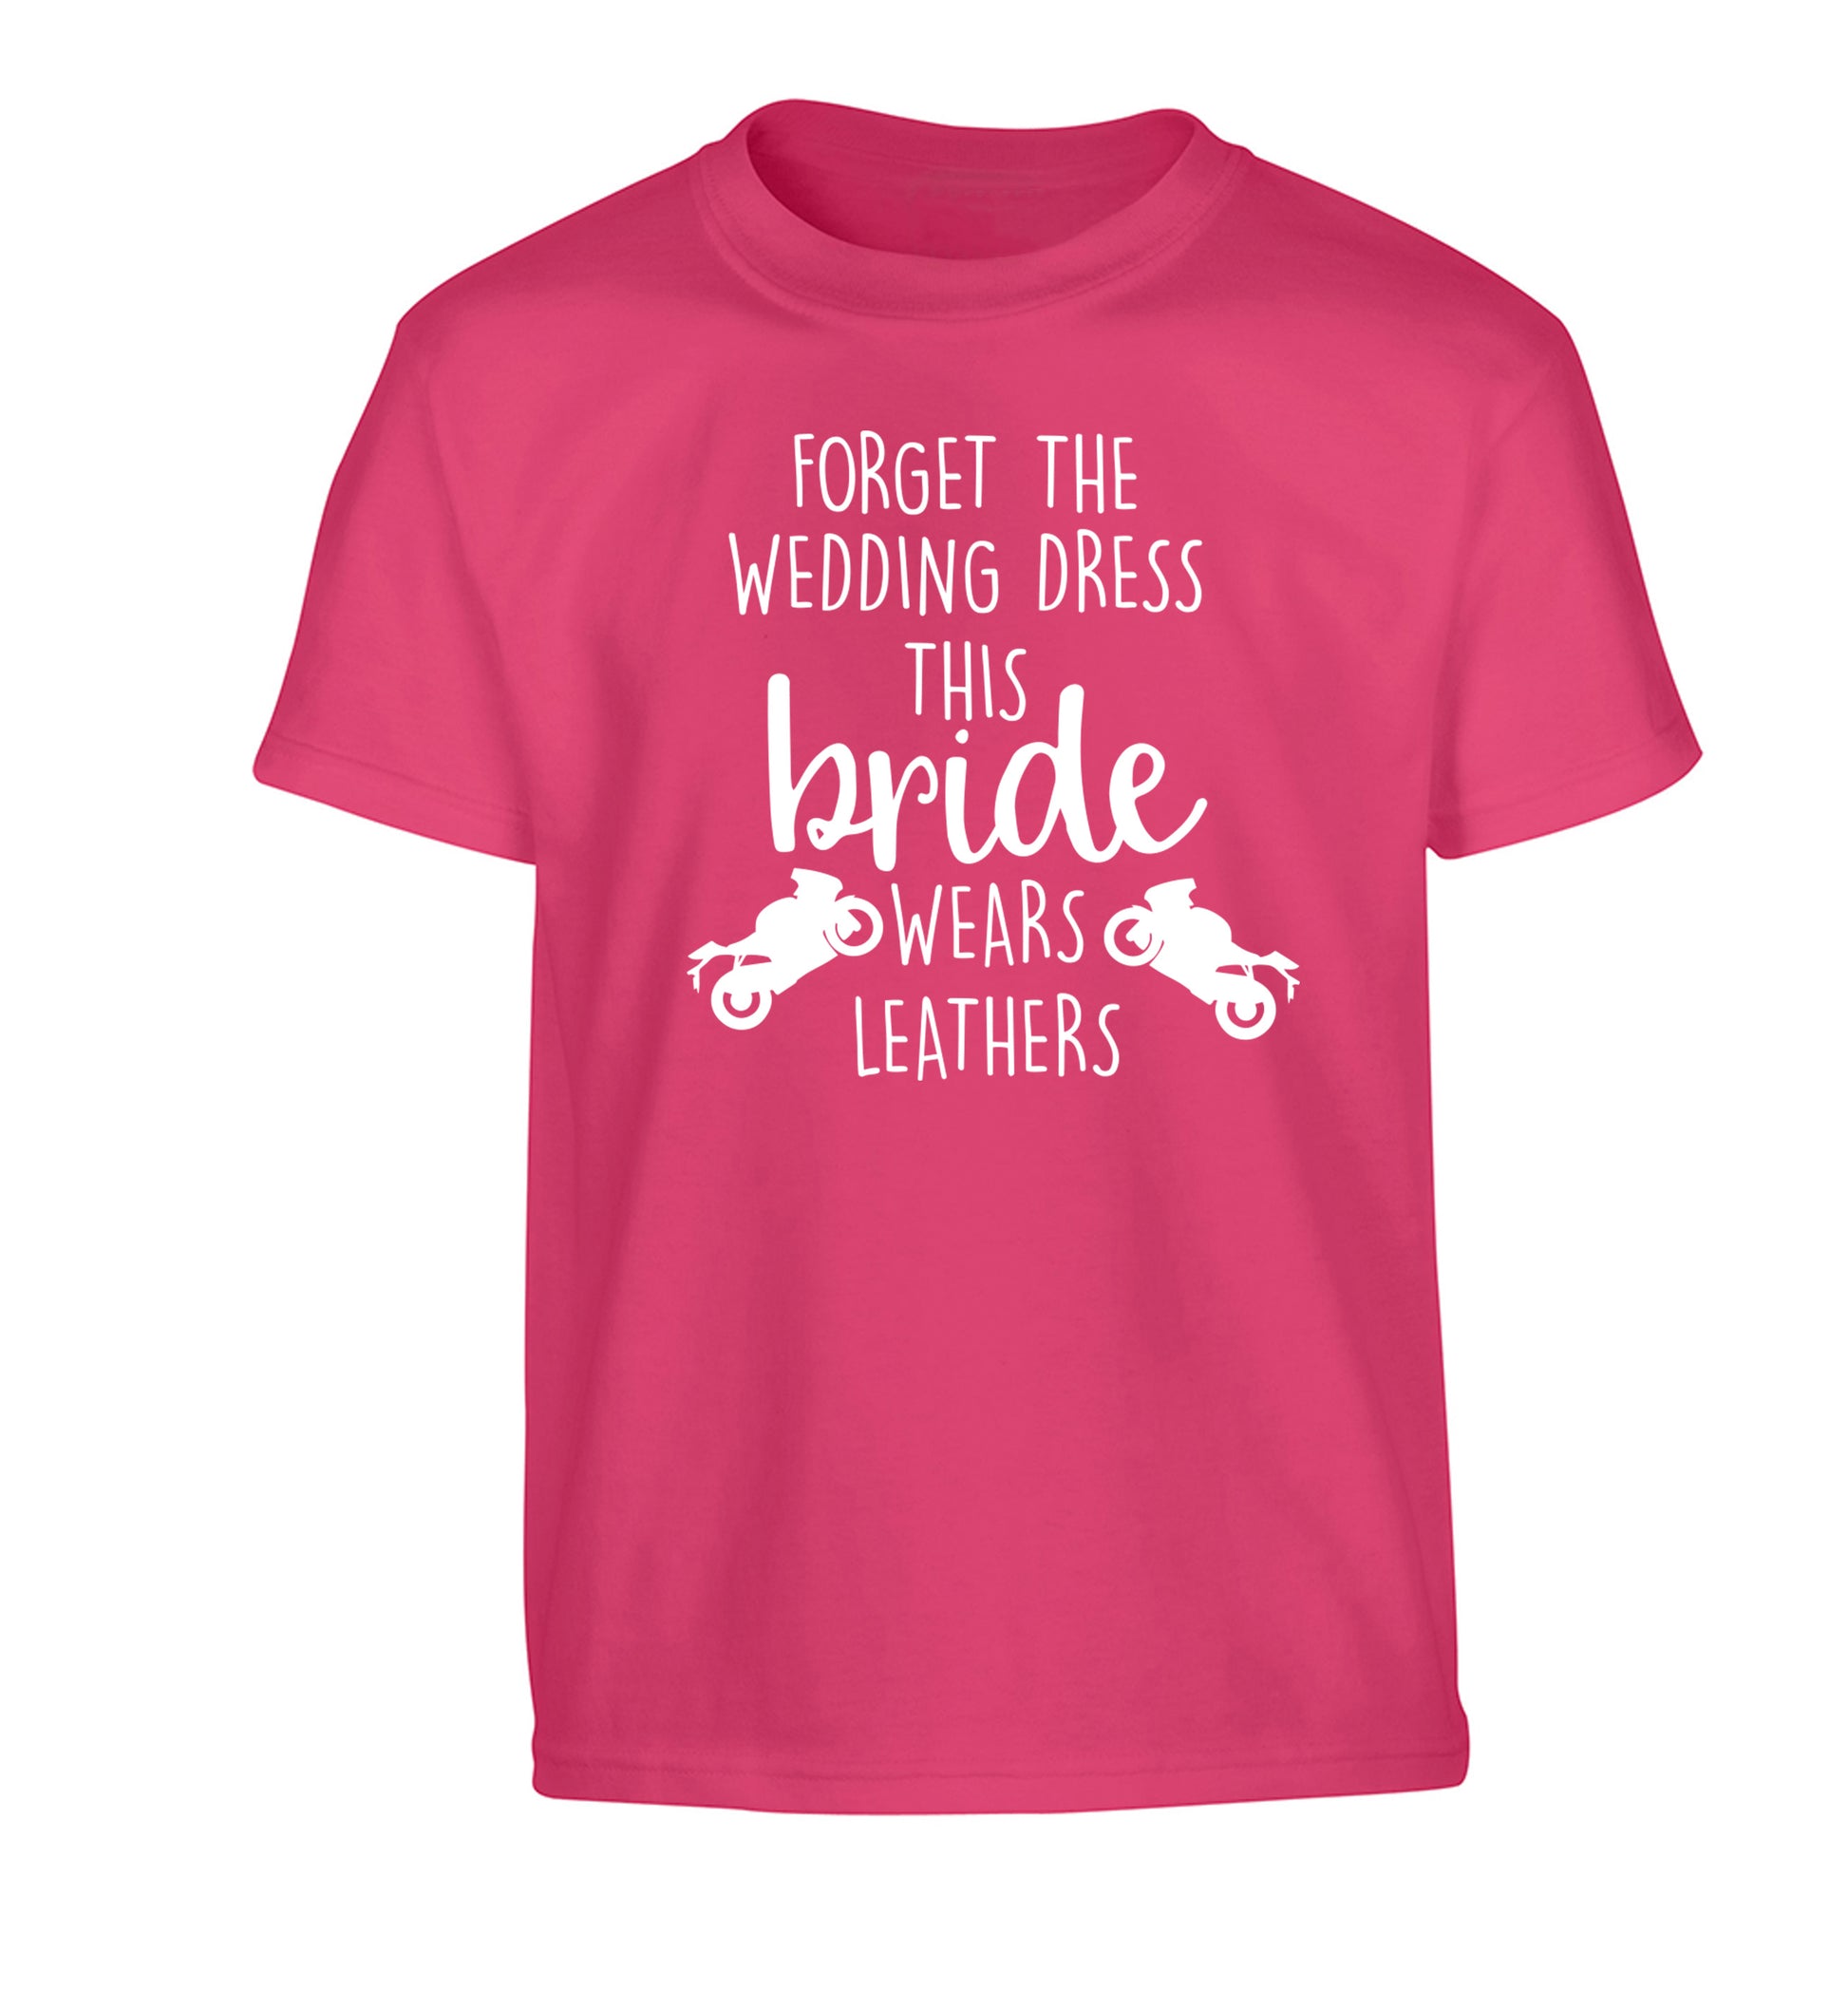 Forget the wedding dress this bride wears leathers Children's pink Tshirt 12-13 Years